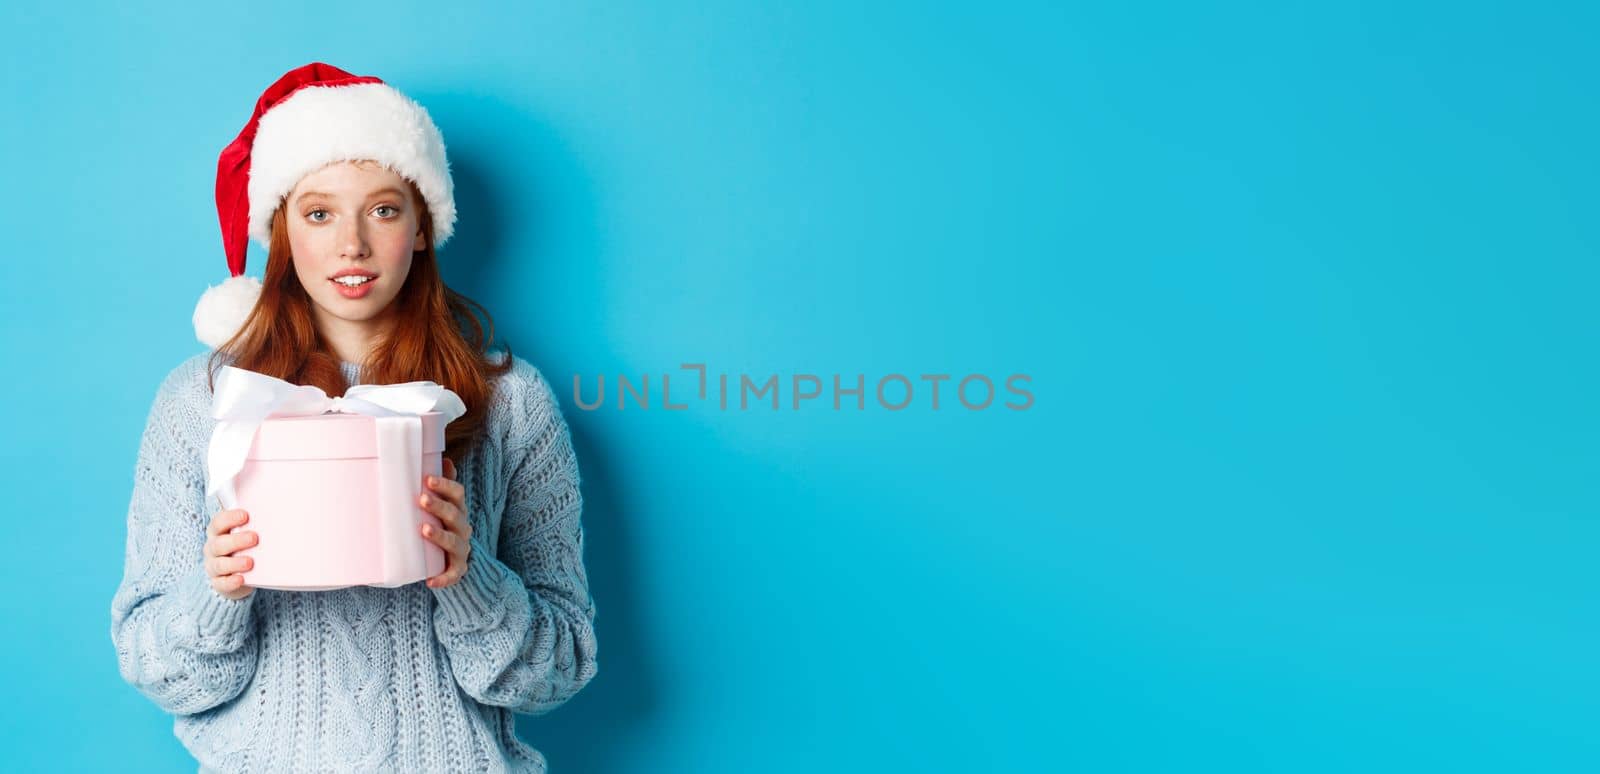 Winter holidays and Christmas Eve concept. Cute redhead girl wearing Santa hat, holding New Year gift and looking at camera, standing against blue background.